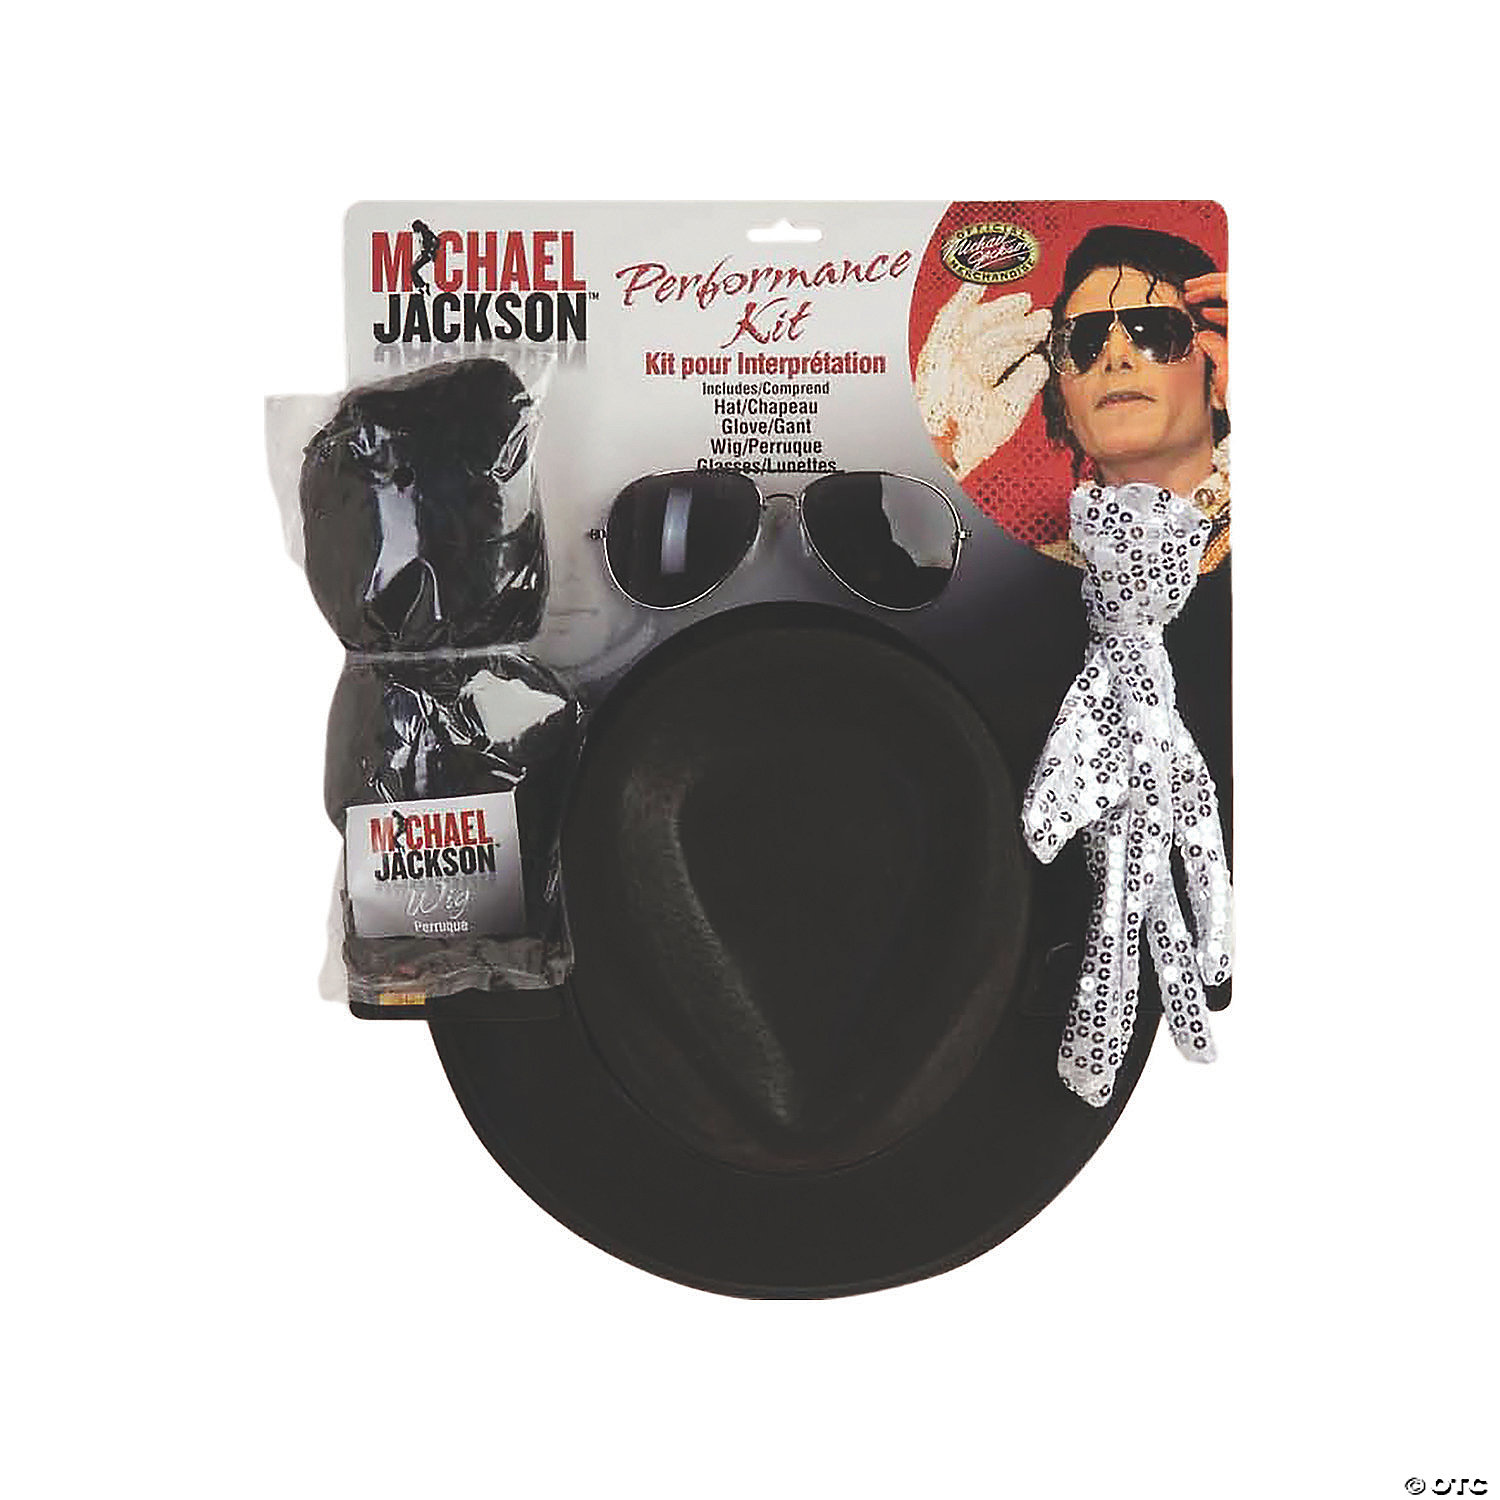 Michael Jackson Suit of Lights glove up for sale